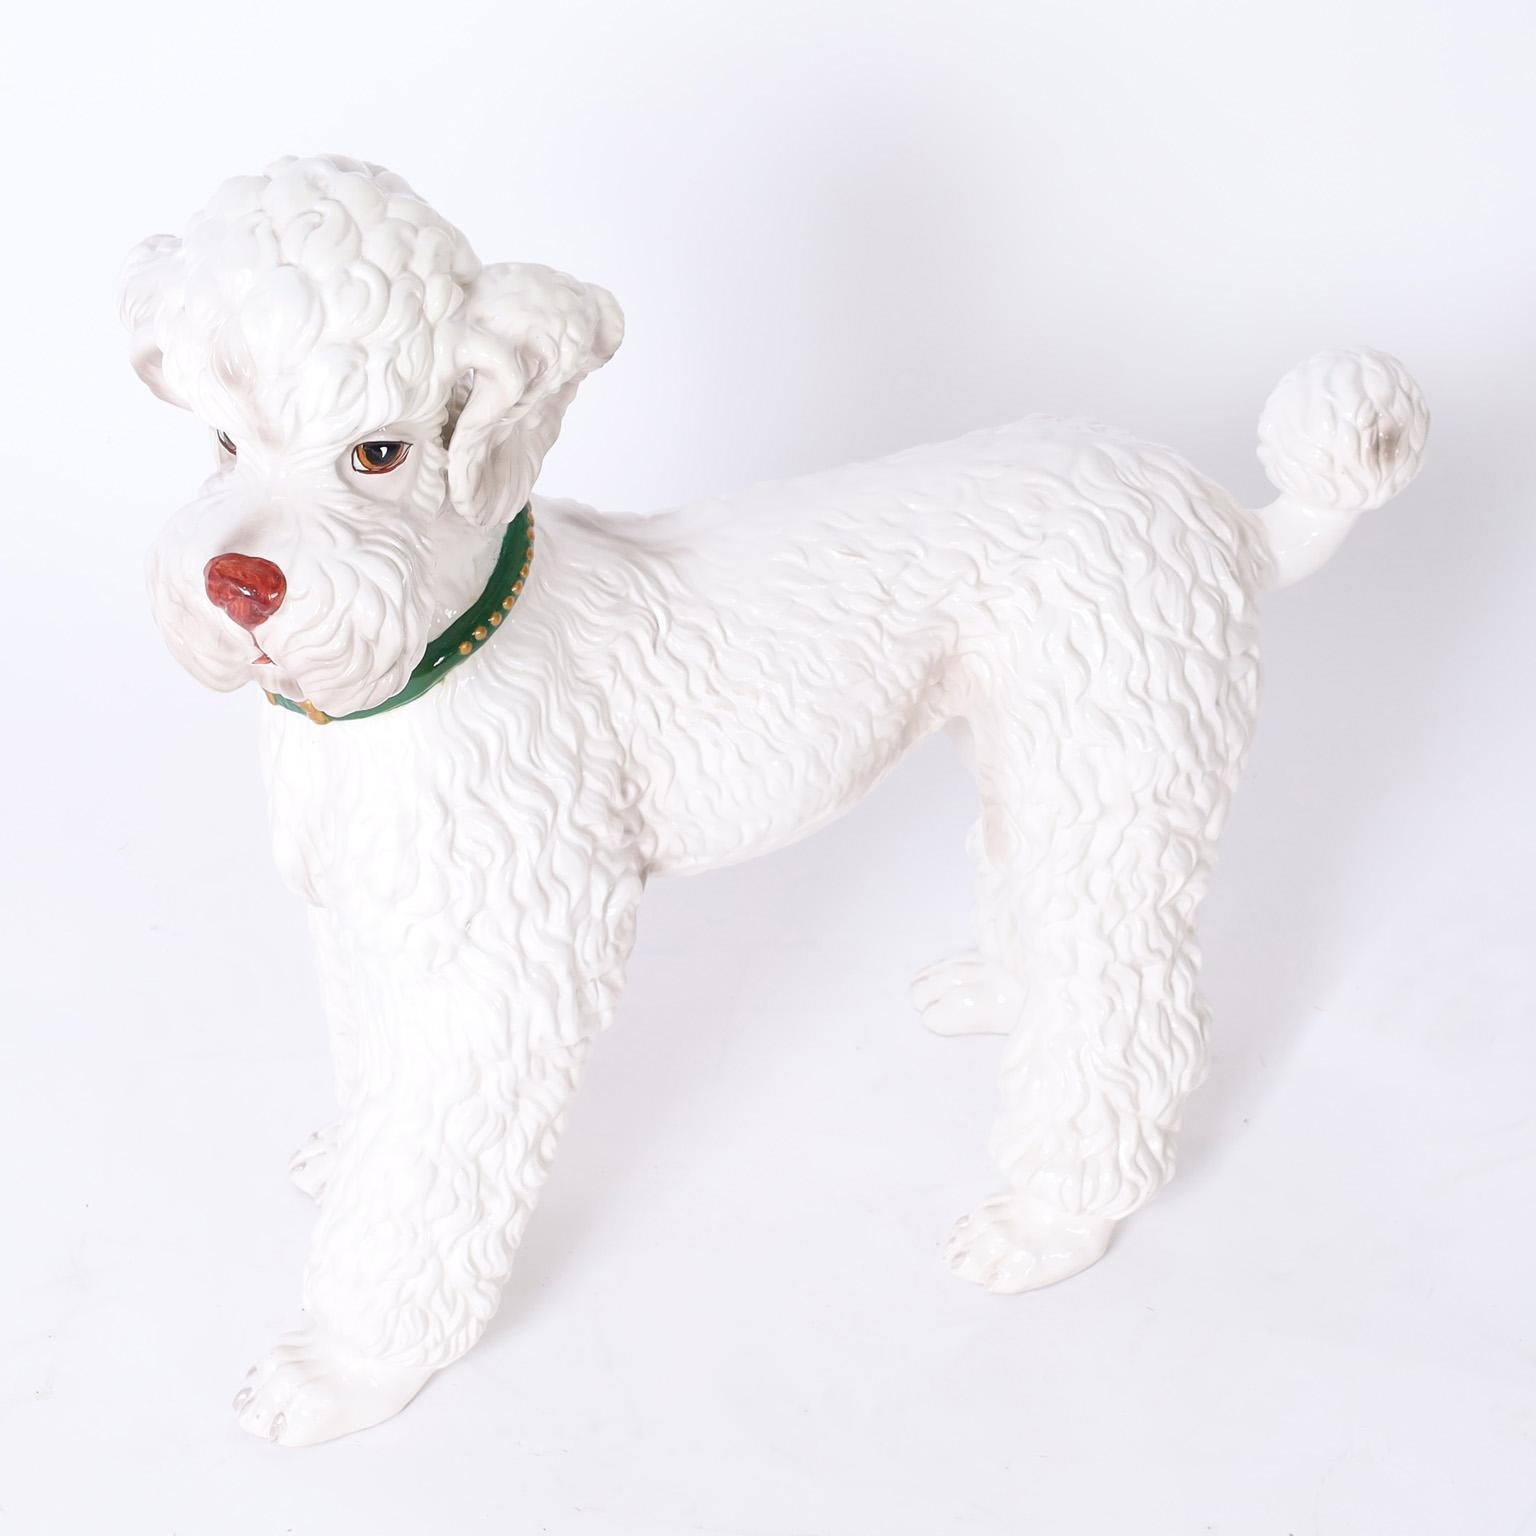 Life size vintage poodle sculpture crafted in ceramic, decorated and glazed with aplomb. Interesting note on the bottom of a paw.